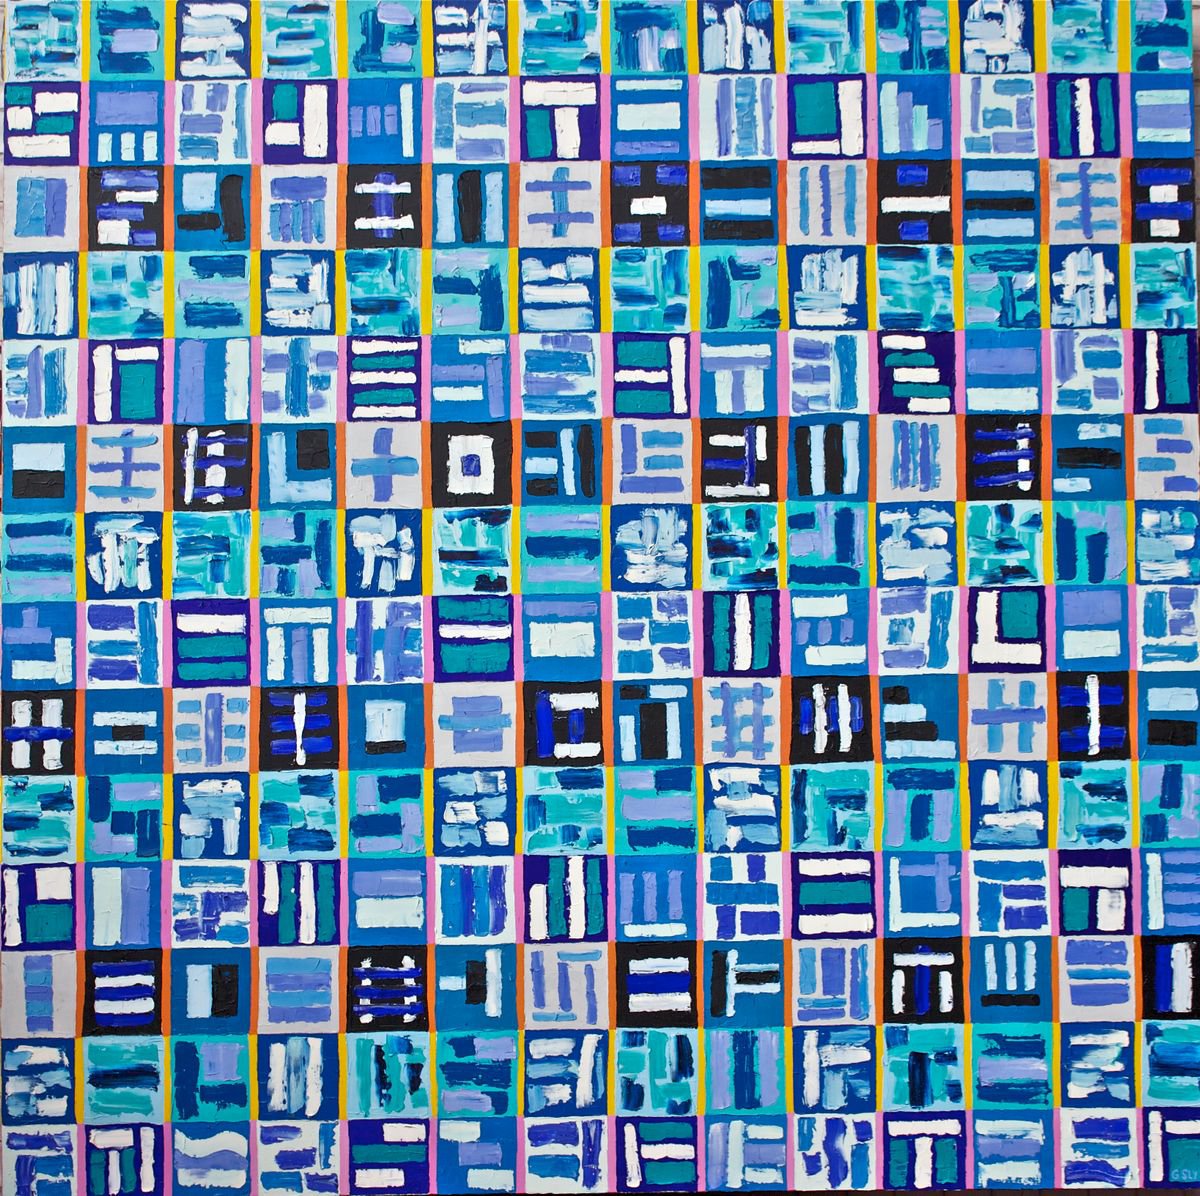 Square Sequence No.25 - Birth of Language No.3 by Garry Sly